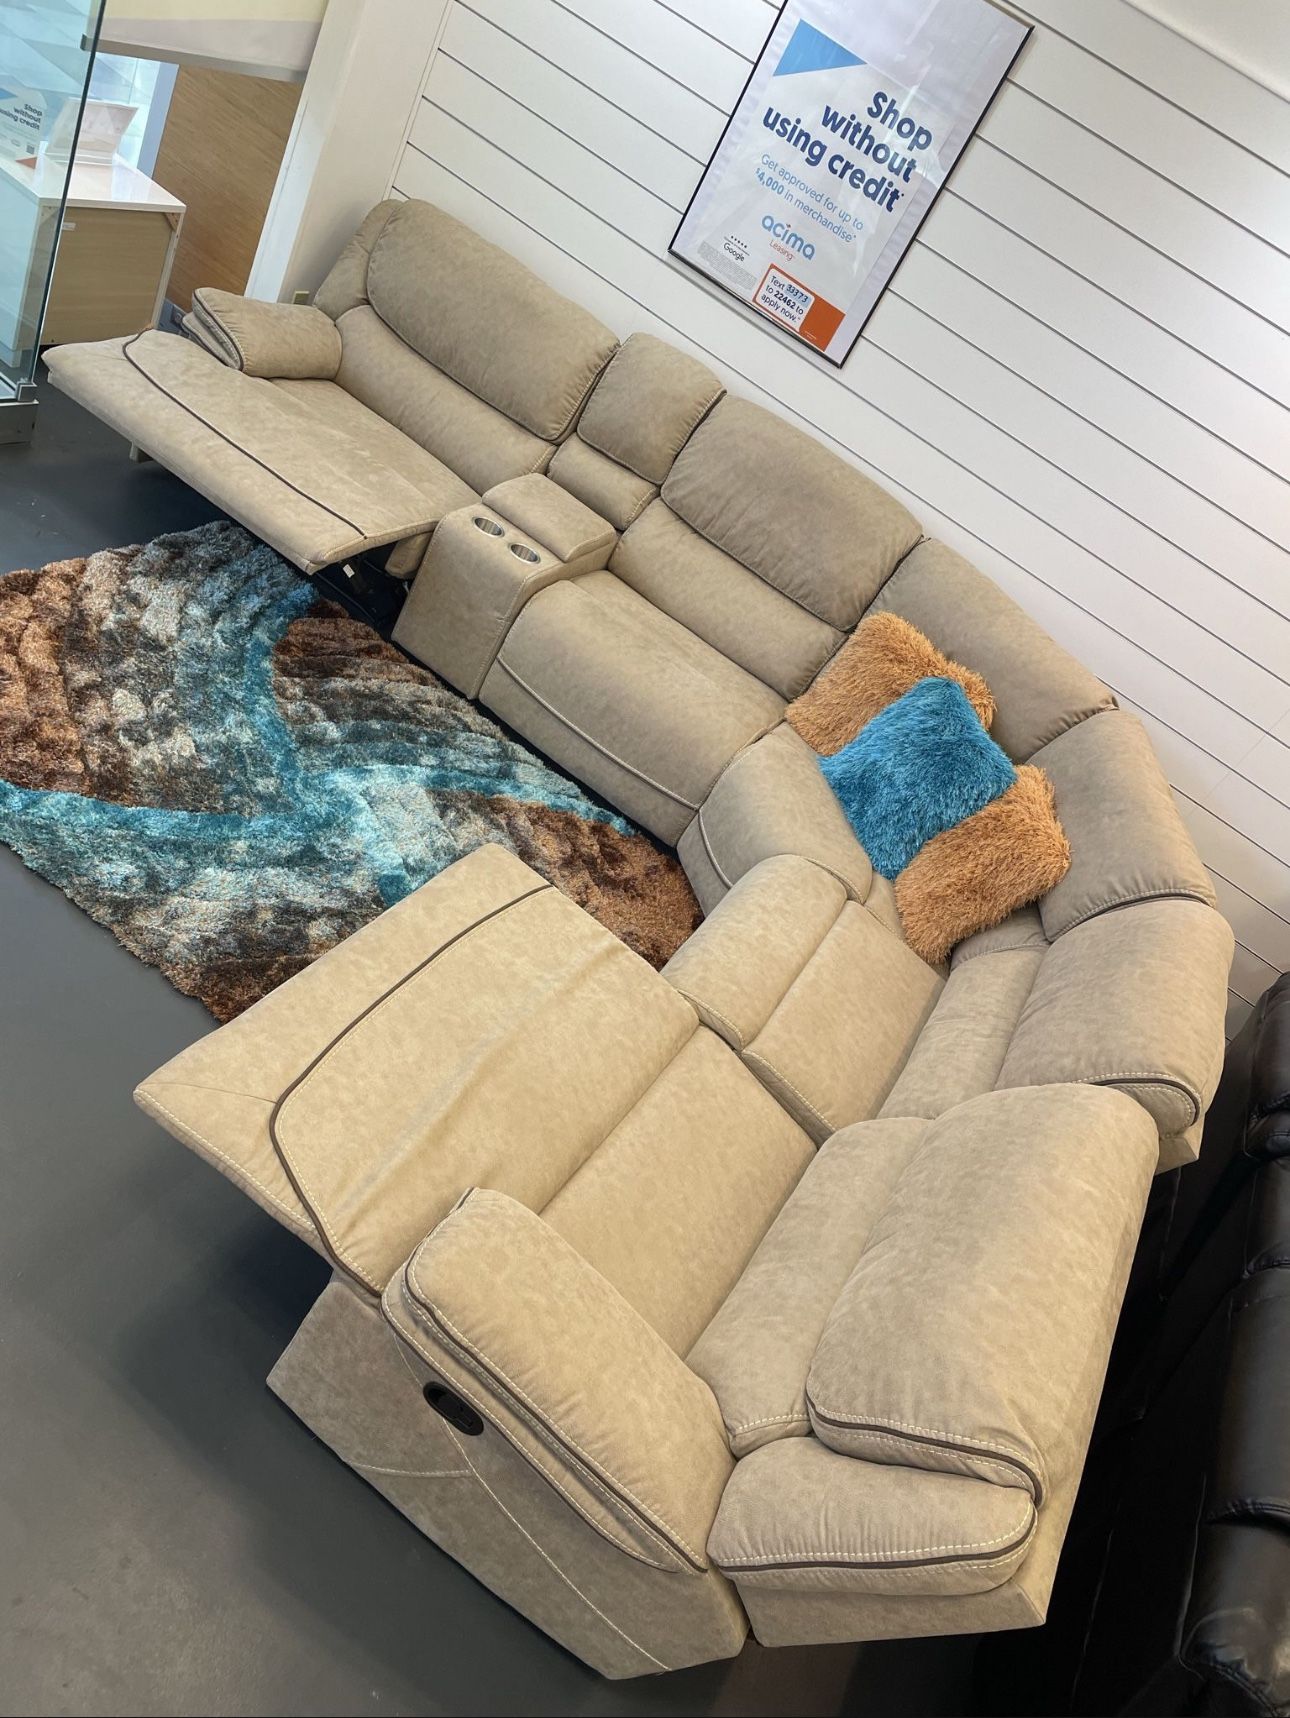 COMFY NEW ALEJANDRA RECLINING SECTIONAL SOFA ON SALE ONLY $1199. IN STOCK SAME DAY DELIVERY 🚚 EASY FINANCING 